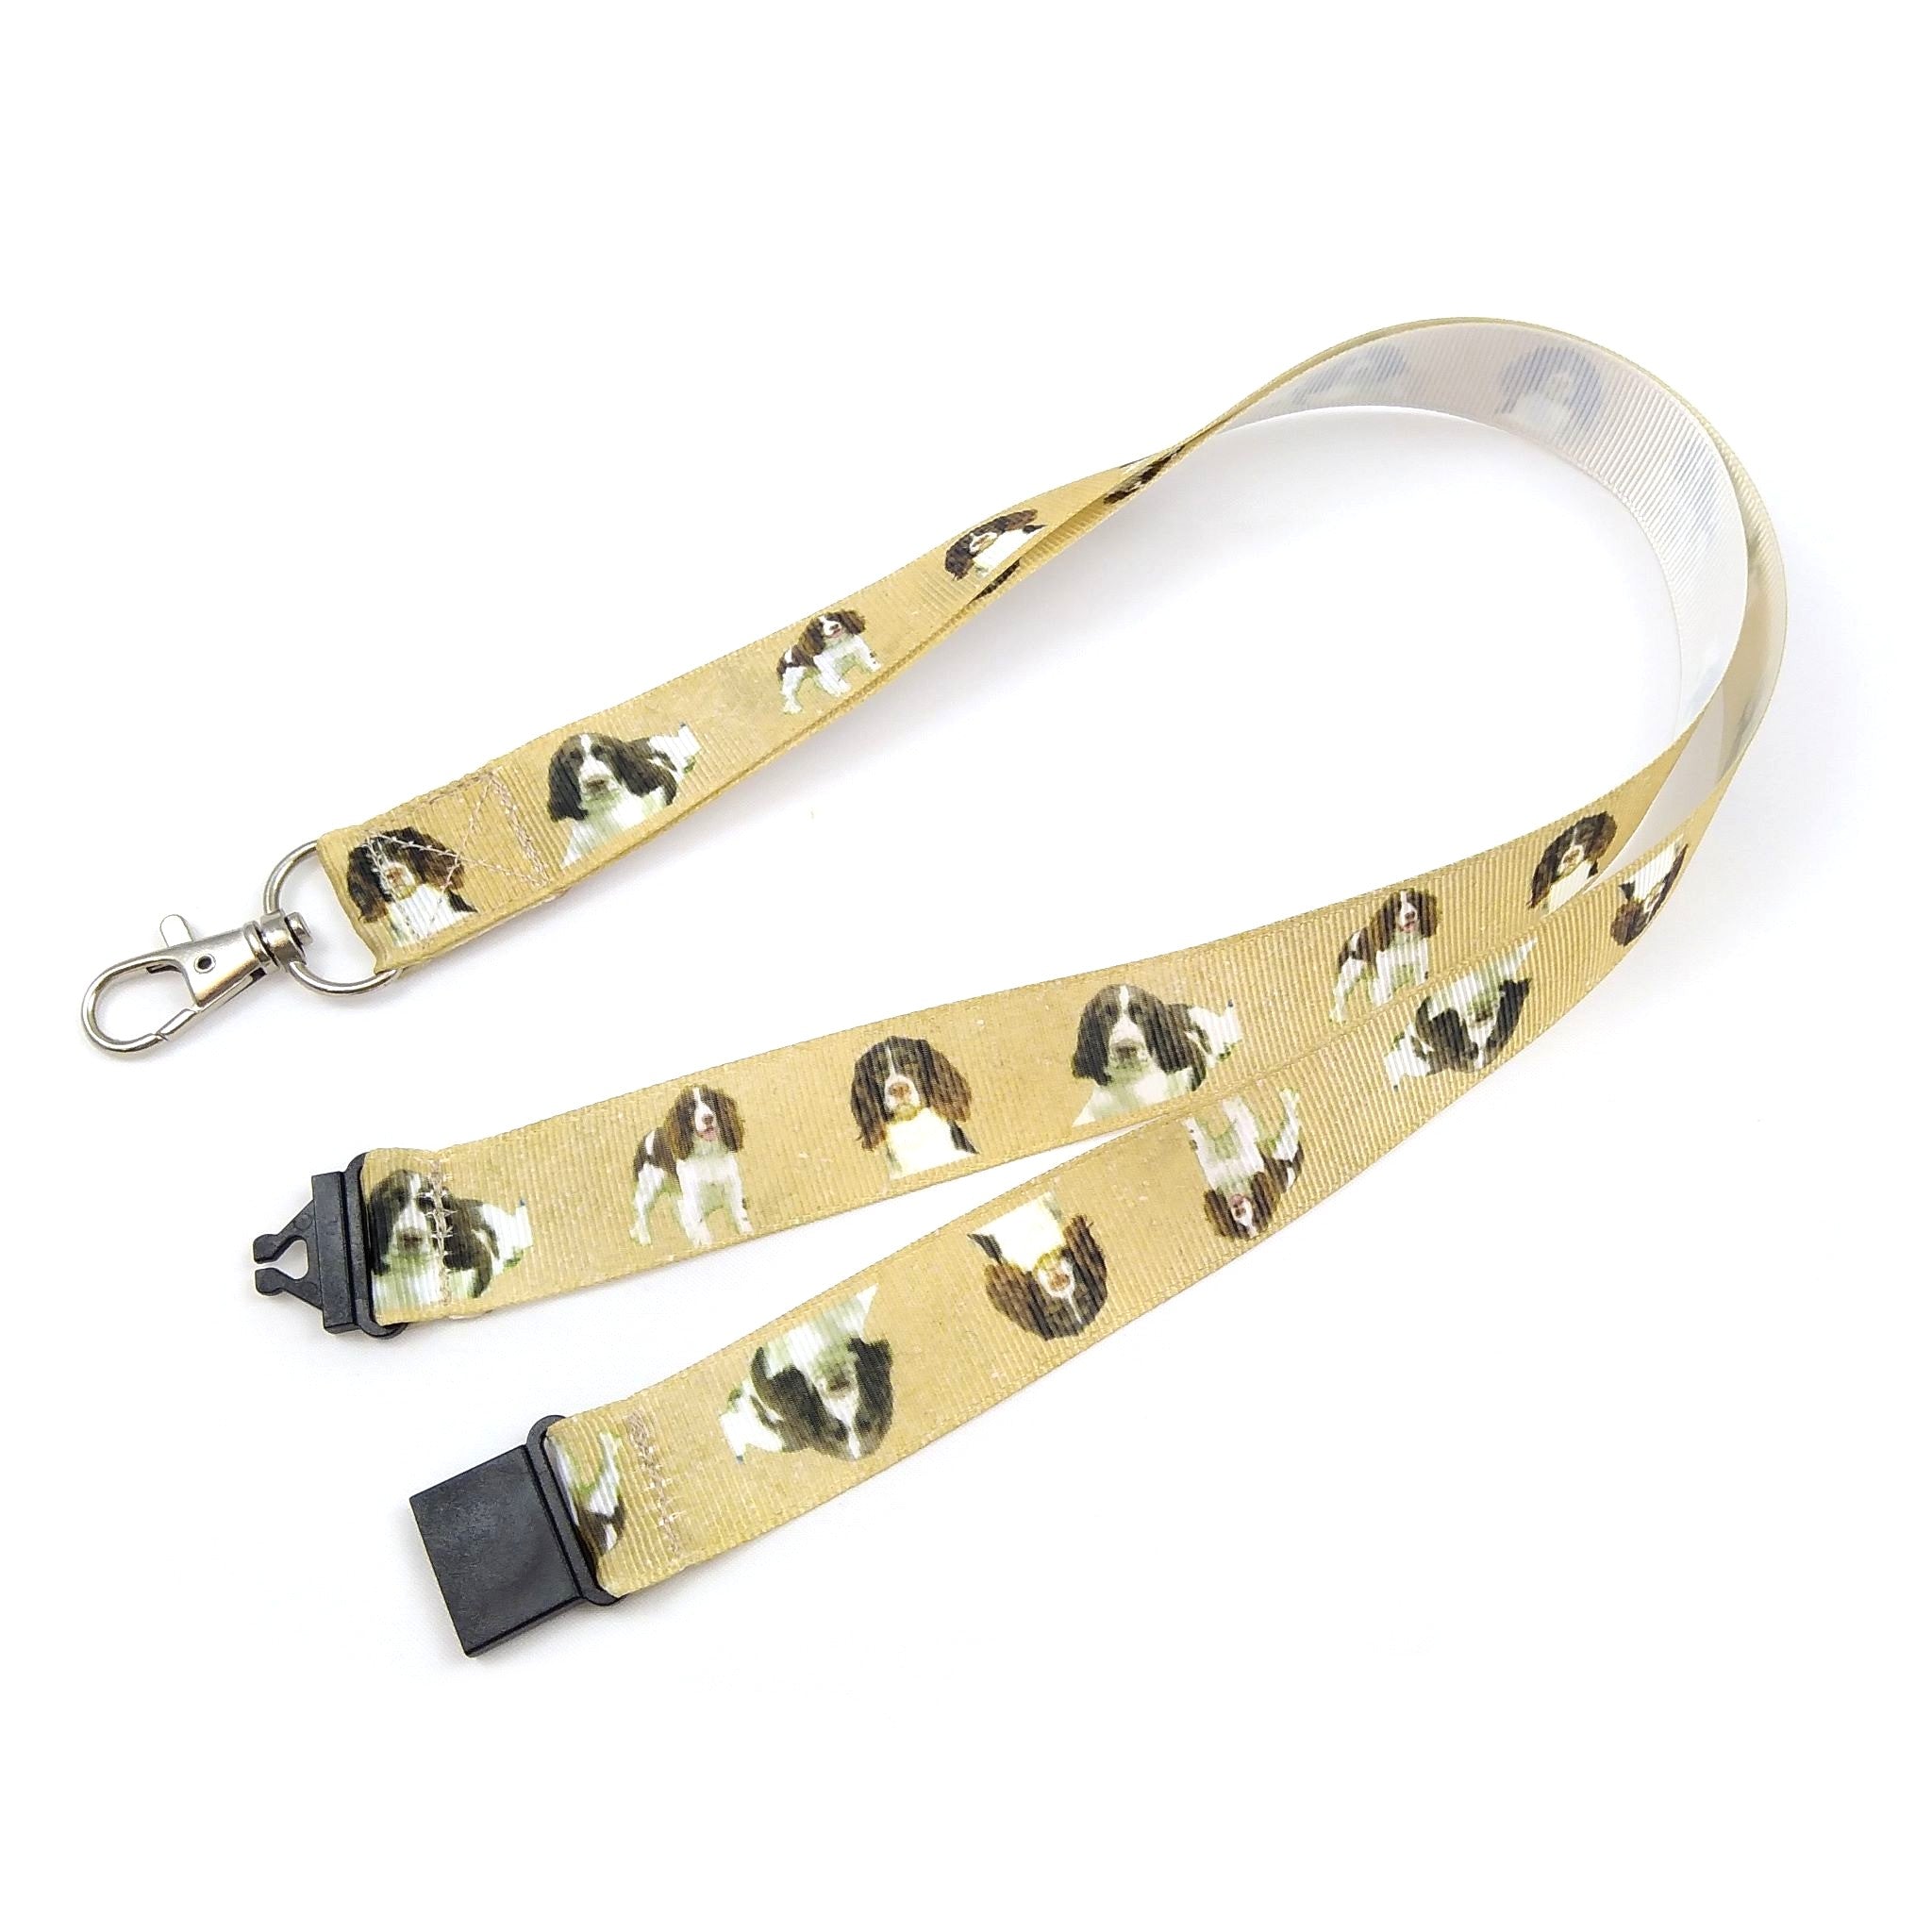 Spaniels Lanyard with safety clasp